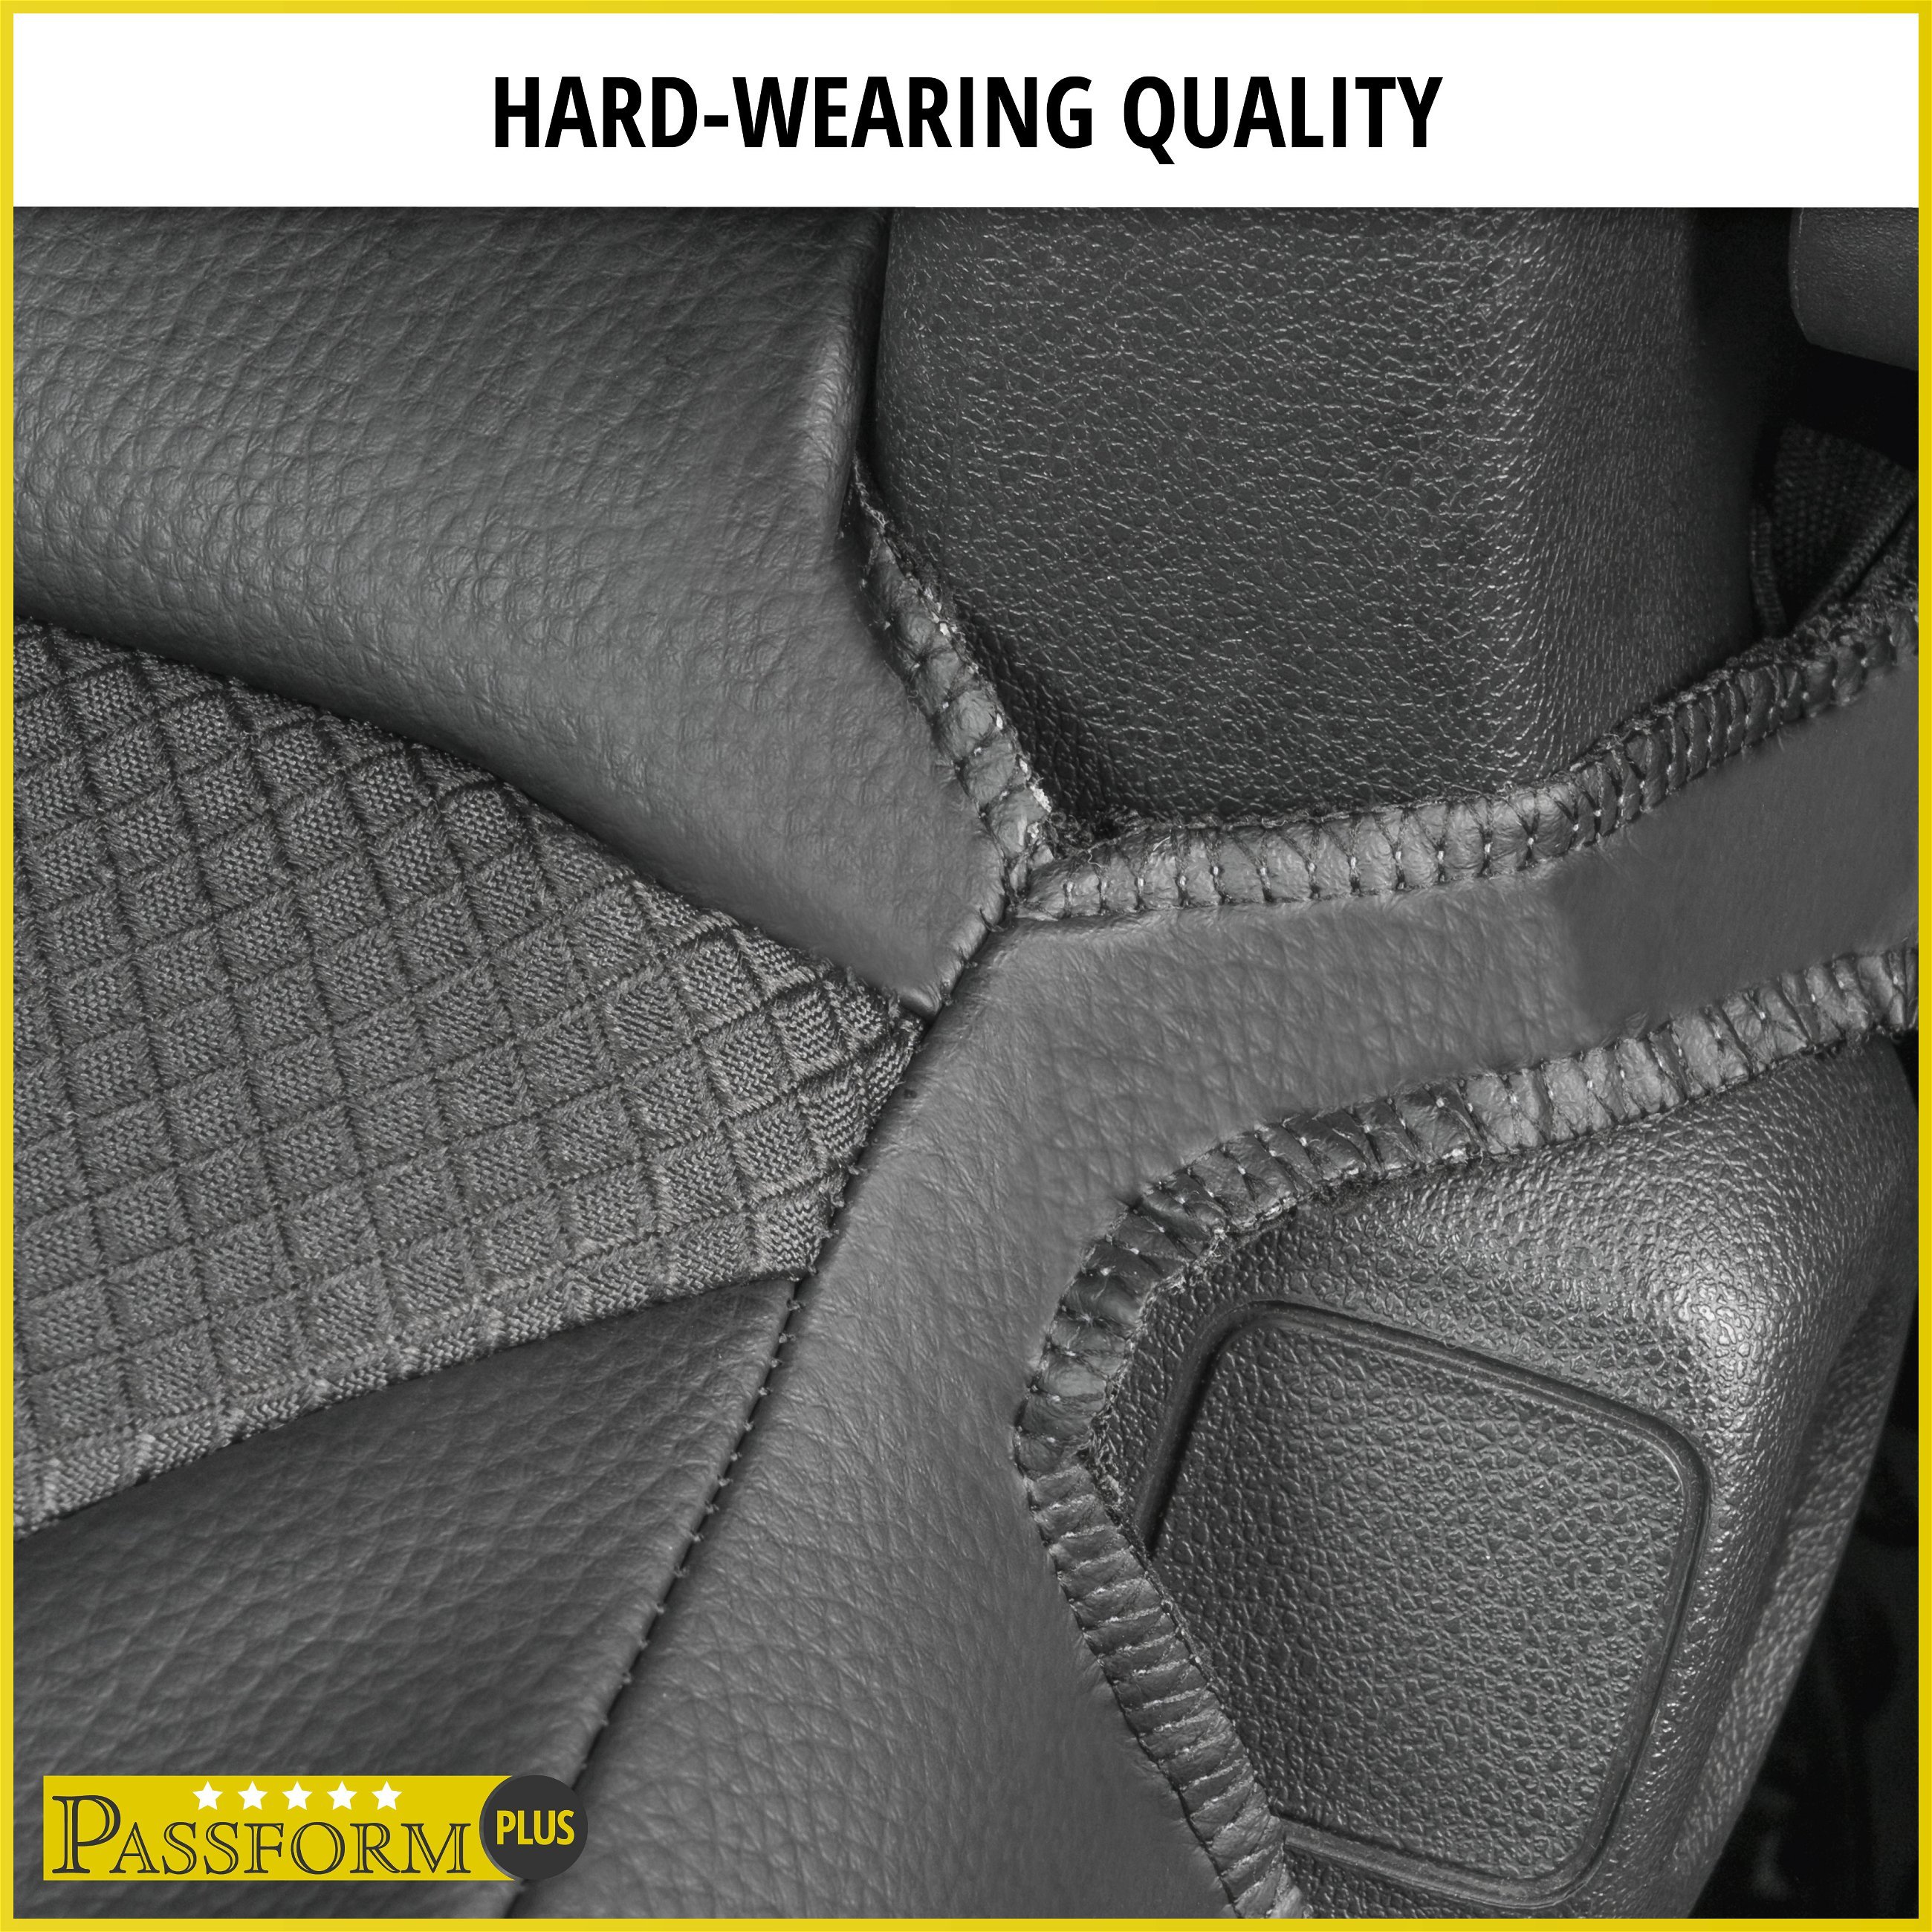 Premium Seat Cover for Fiat Doblo 02/2010-Today, 2 single seat covers front + 1 armrest cover